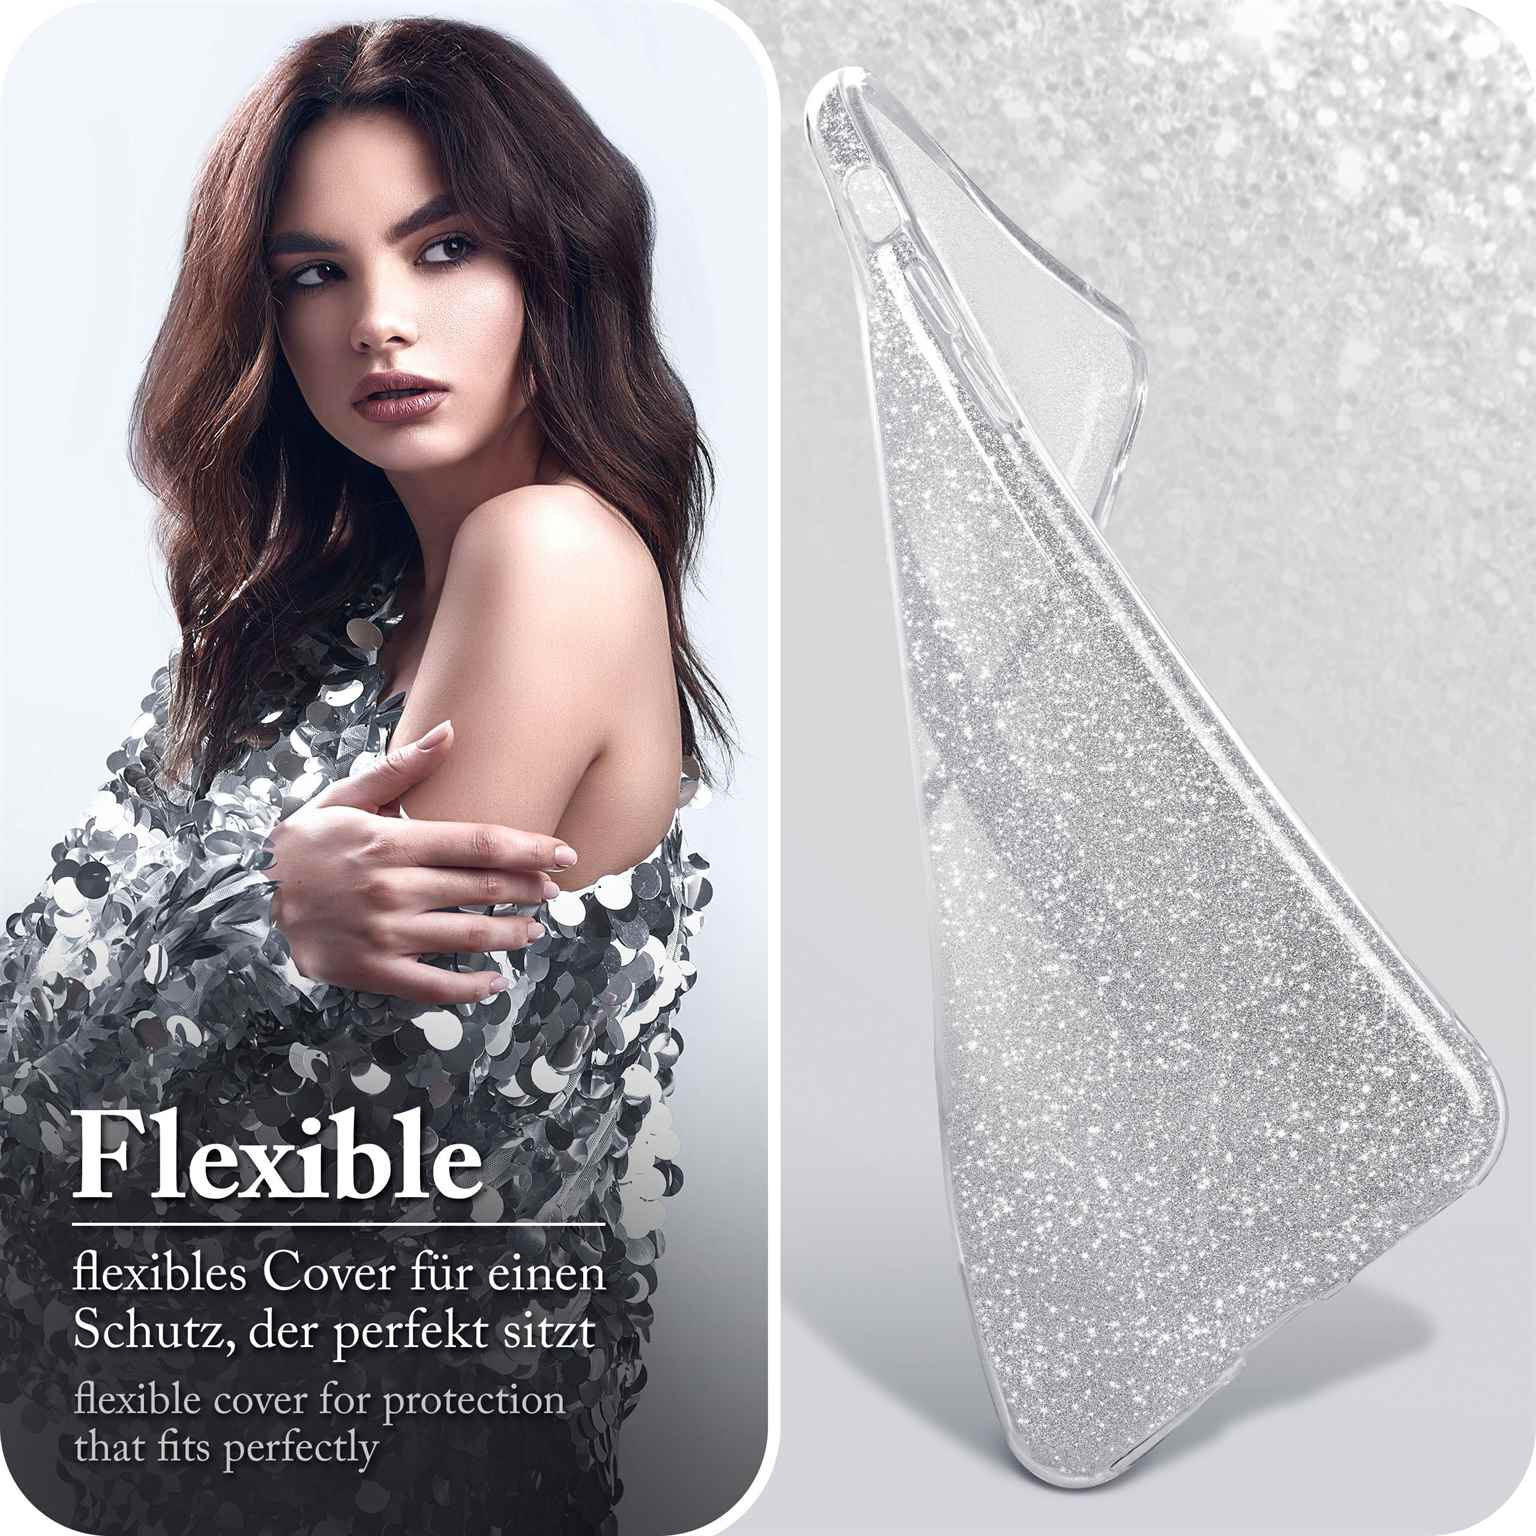 Glitter Silver Samsung, Backcover, ONEFLOW Case, Sparkle - Galaxy S10,